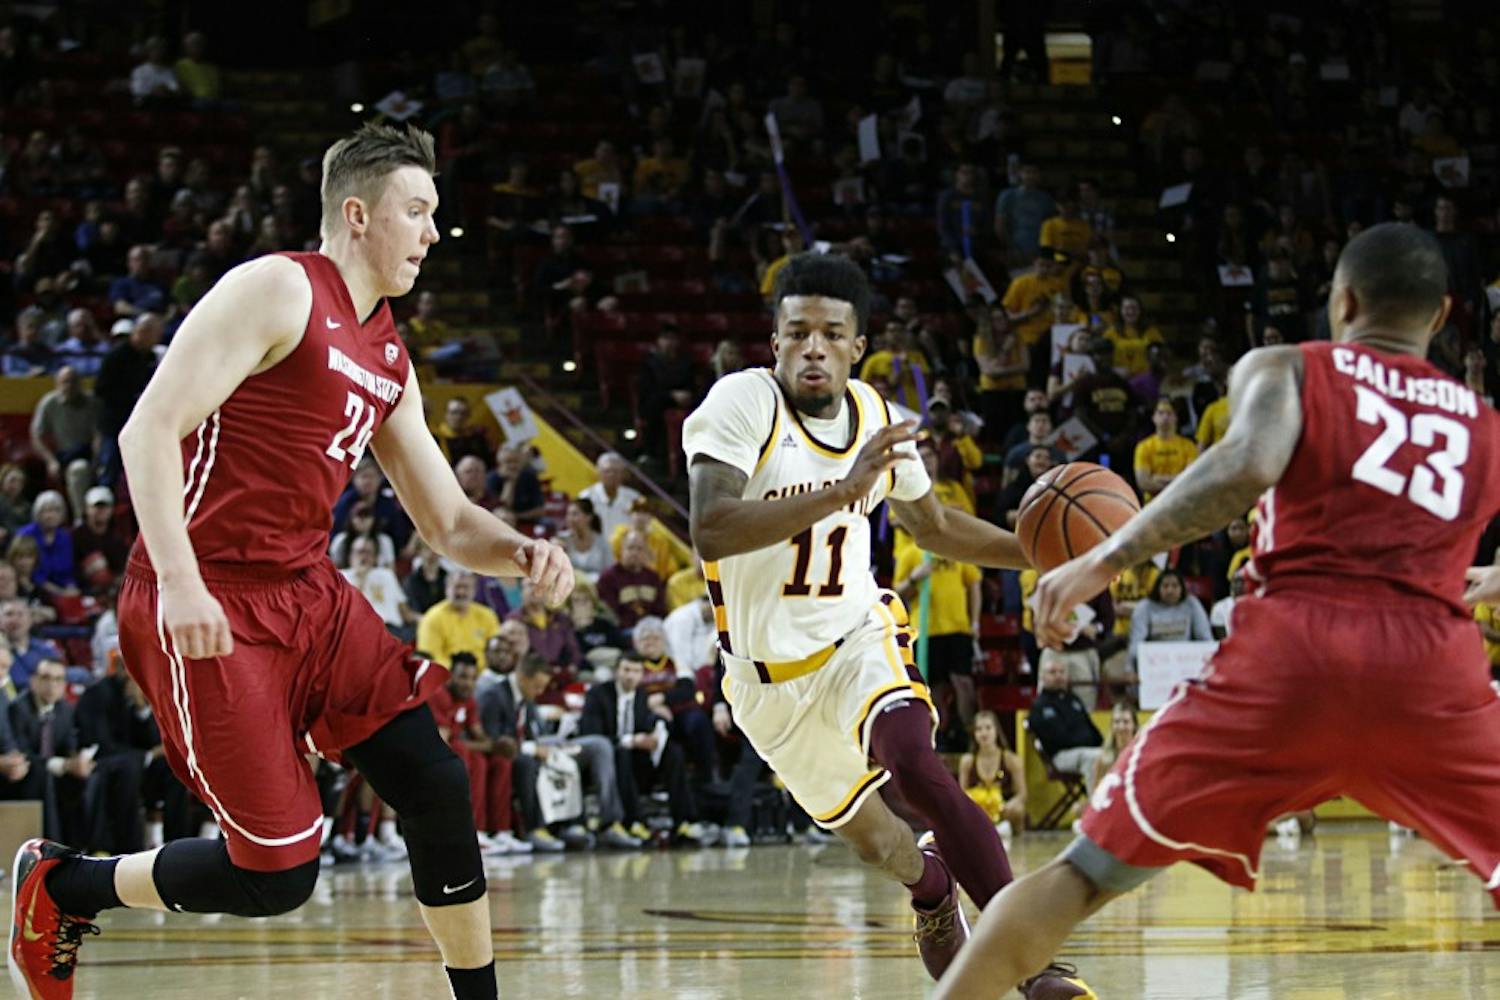 ASU junior Shannon Evans II (11) drives past defense towards the basket in a men's basketball game against Washington State in Wells Fargo Arena in Tempe, Arizona on Sunday Jan. 29, 2017. ASU lost the game 83-91.